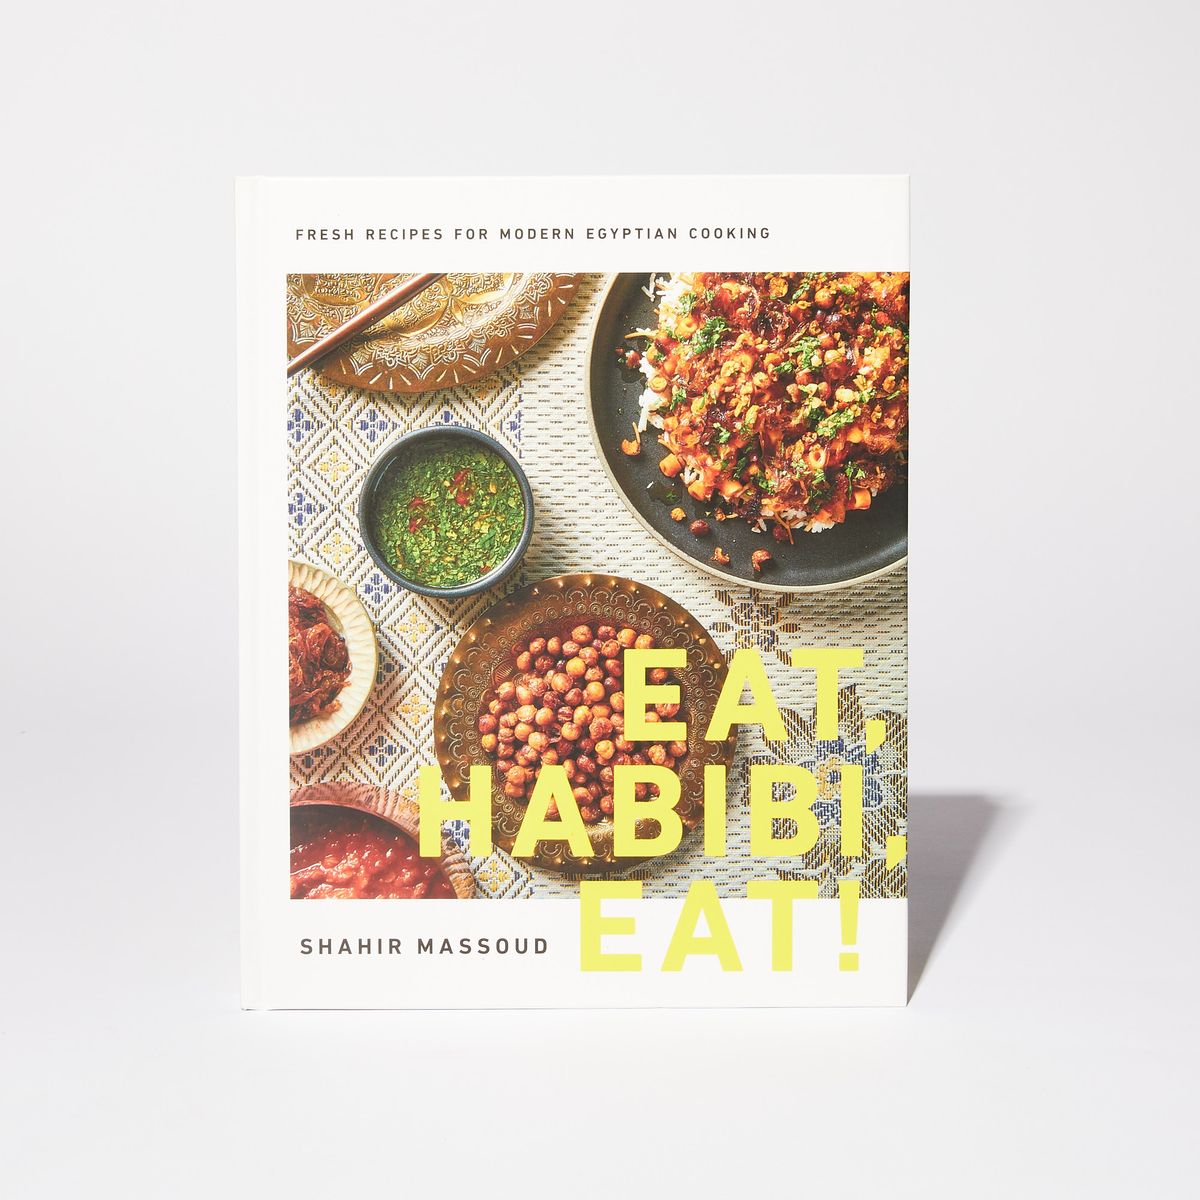 Book cover with several photos of colorful Egyptian dishes with the title "Eat Habibi, Eat!", the name "Shahir Massoud", and the text "Fresh Recipes for Modern Egyptian Cooking"